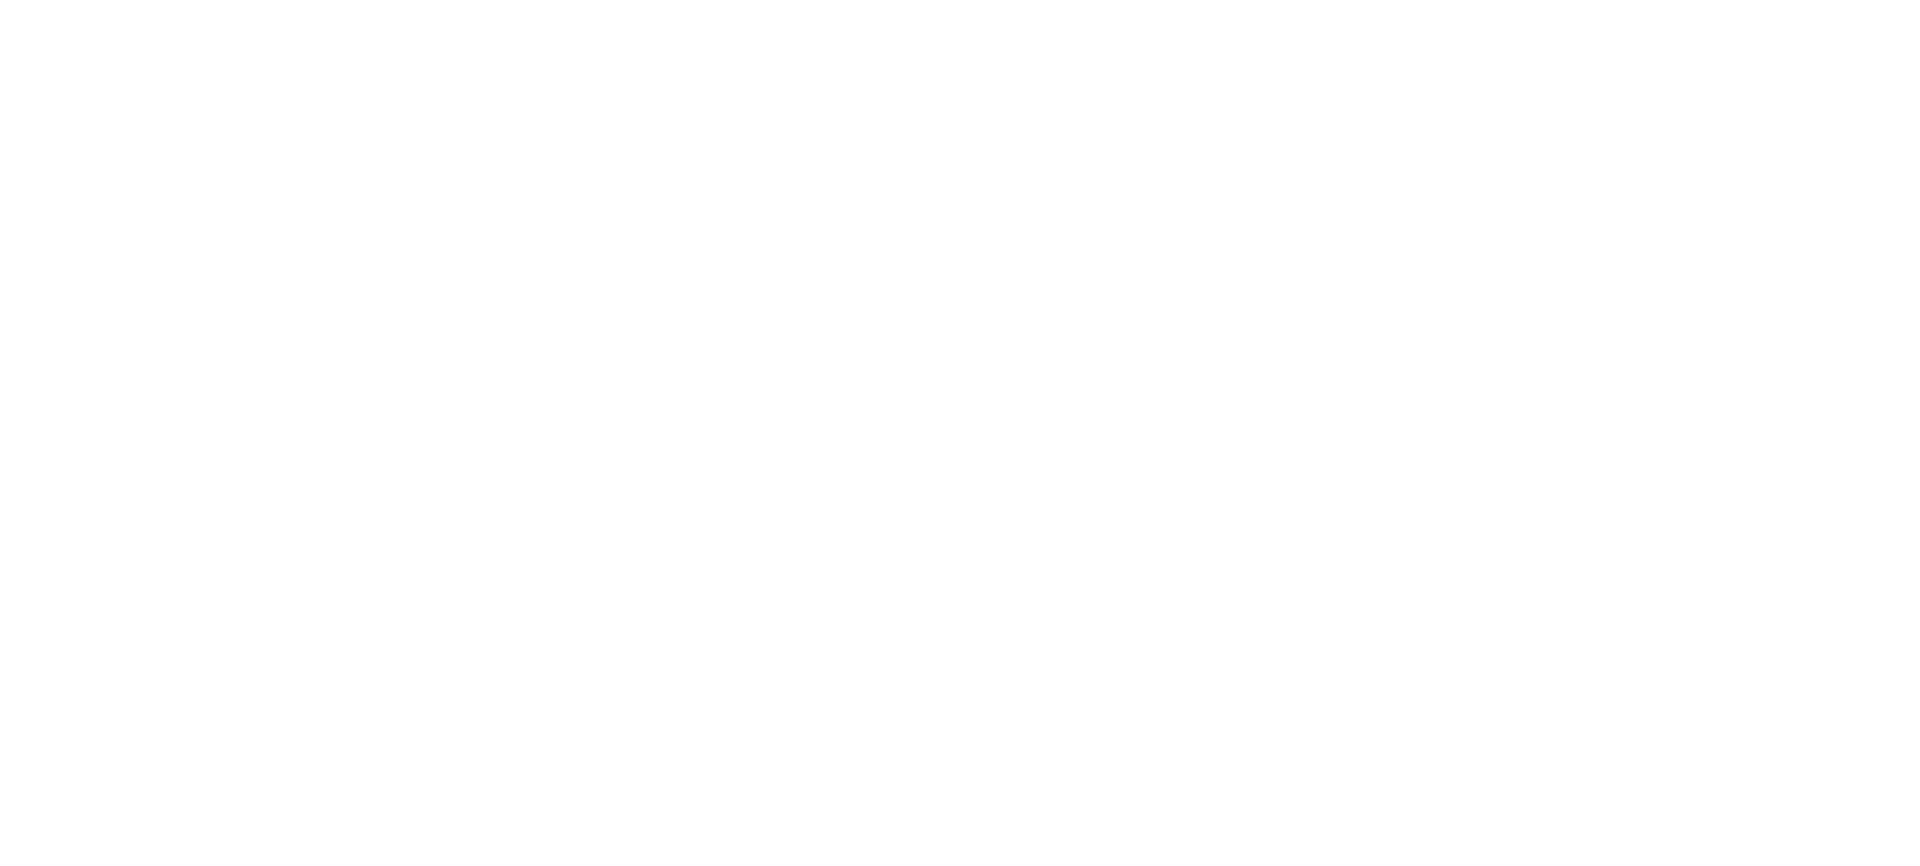 T.W. Crow and Son Family Funeral Home Logo